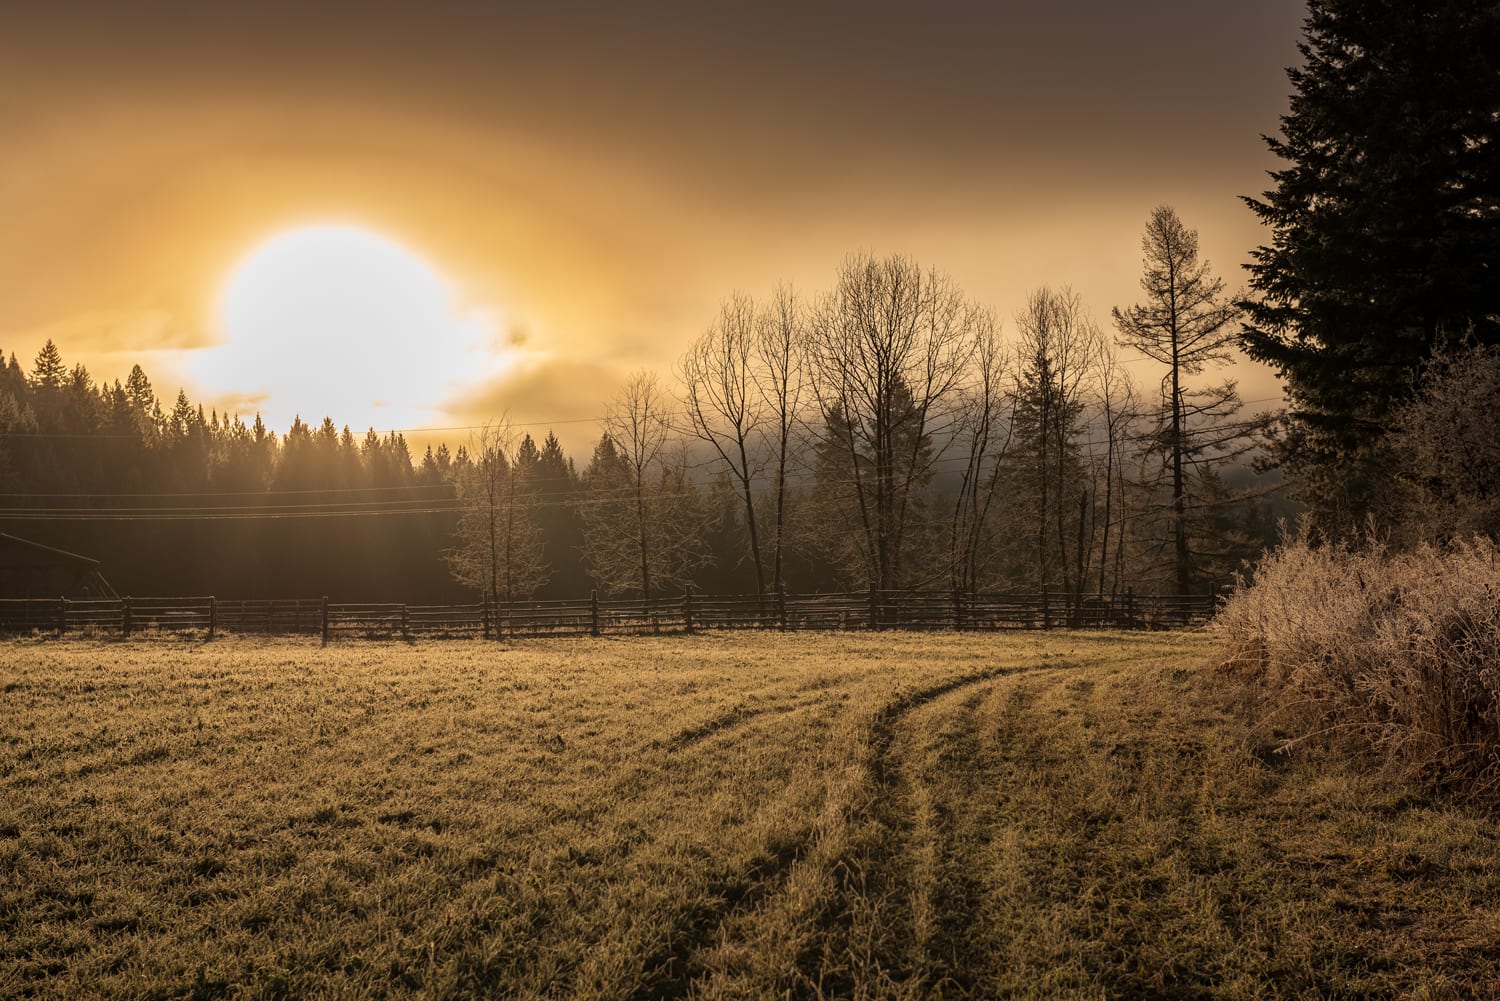 Kamloops rural life sunrise over fields with tall trees in a forest